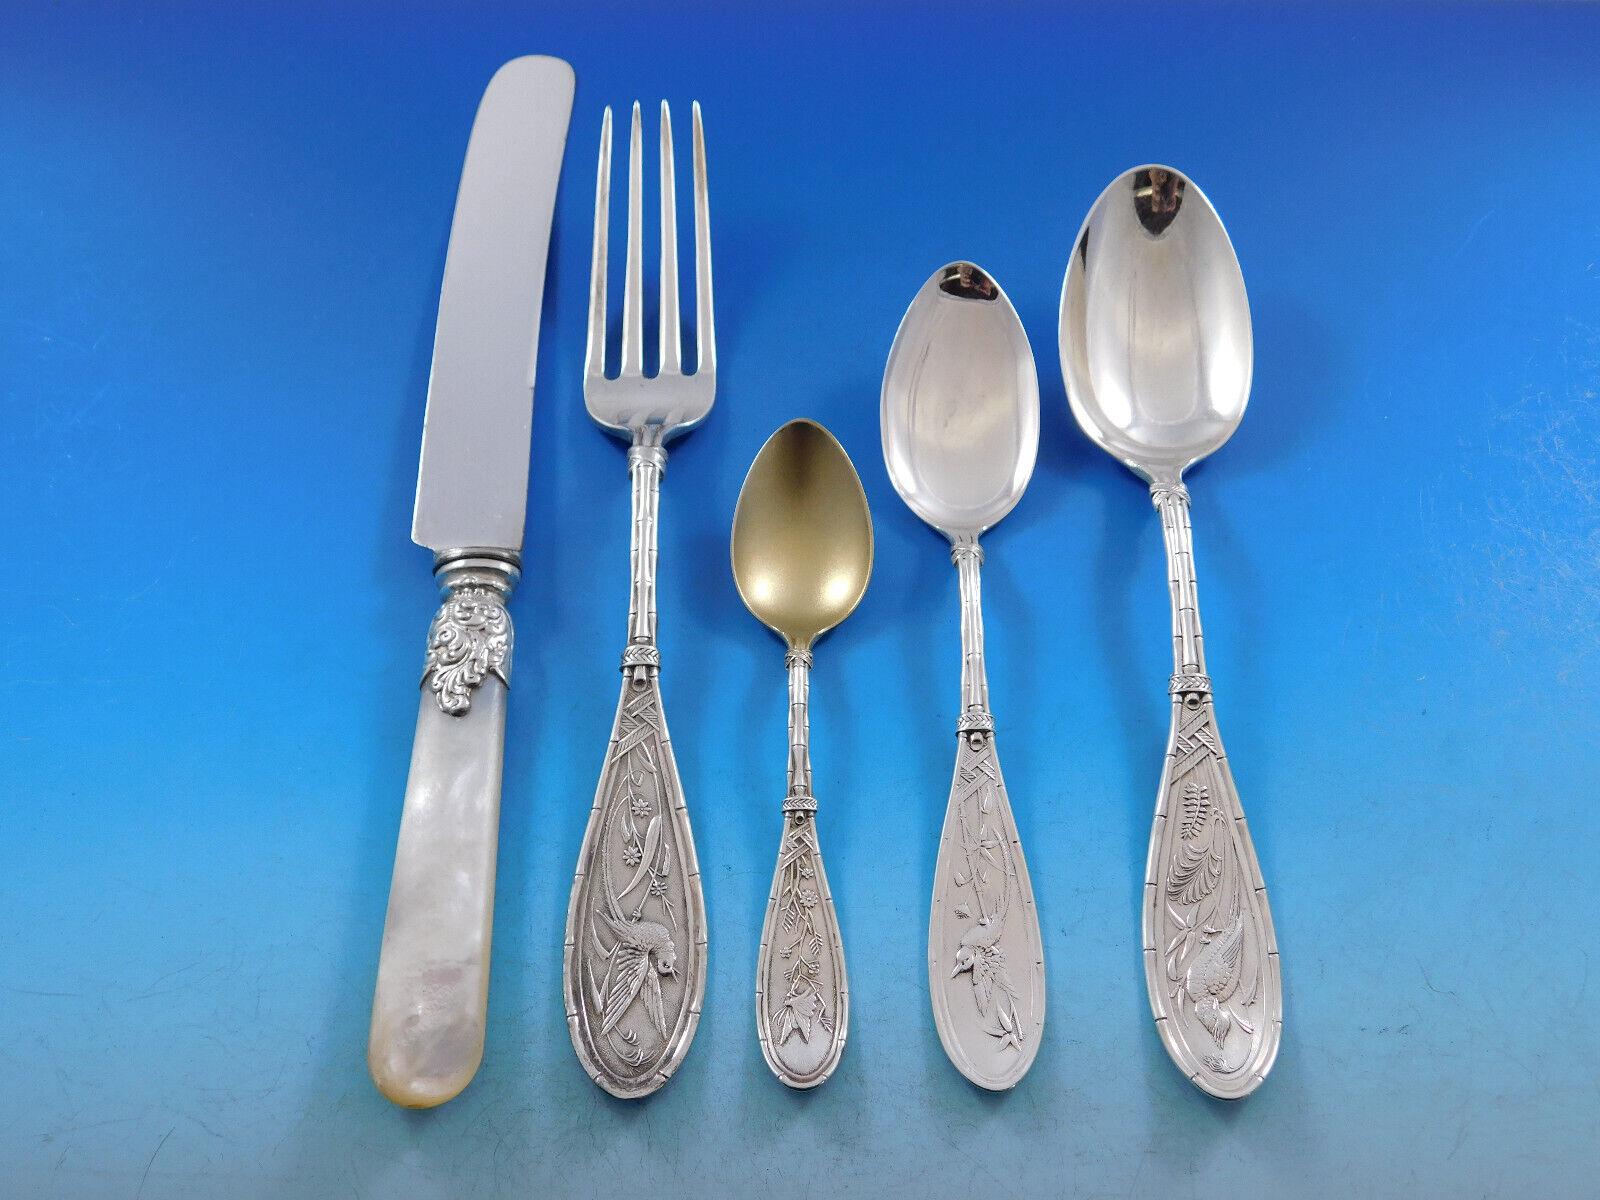 Rare Japanese by Whiting, circa 1874, sterling silver Flatware set - 58 pieces (including 8 Mother of Pearl handle knives) in beautiful vintage chest. This Japonesque pattern features a multi-motif design depicting realistic birds among a background